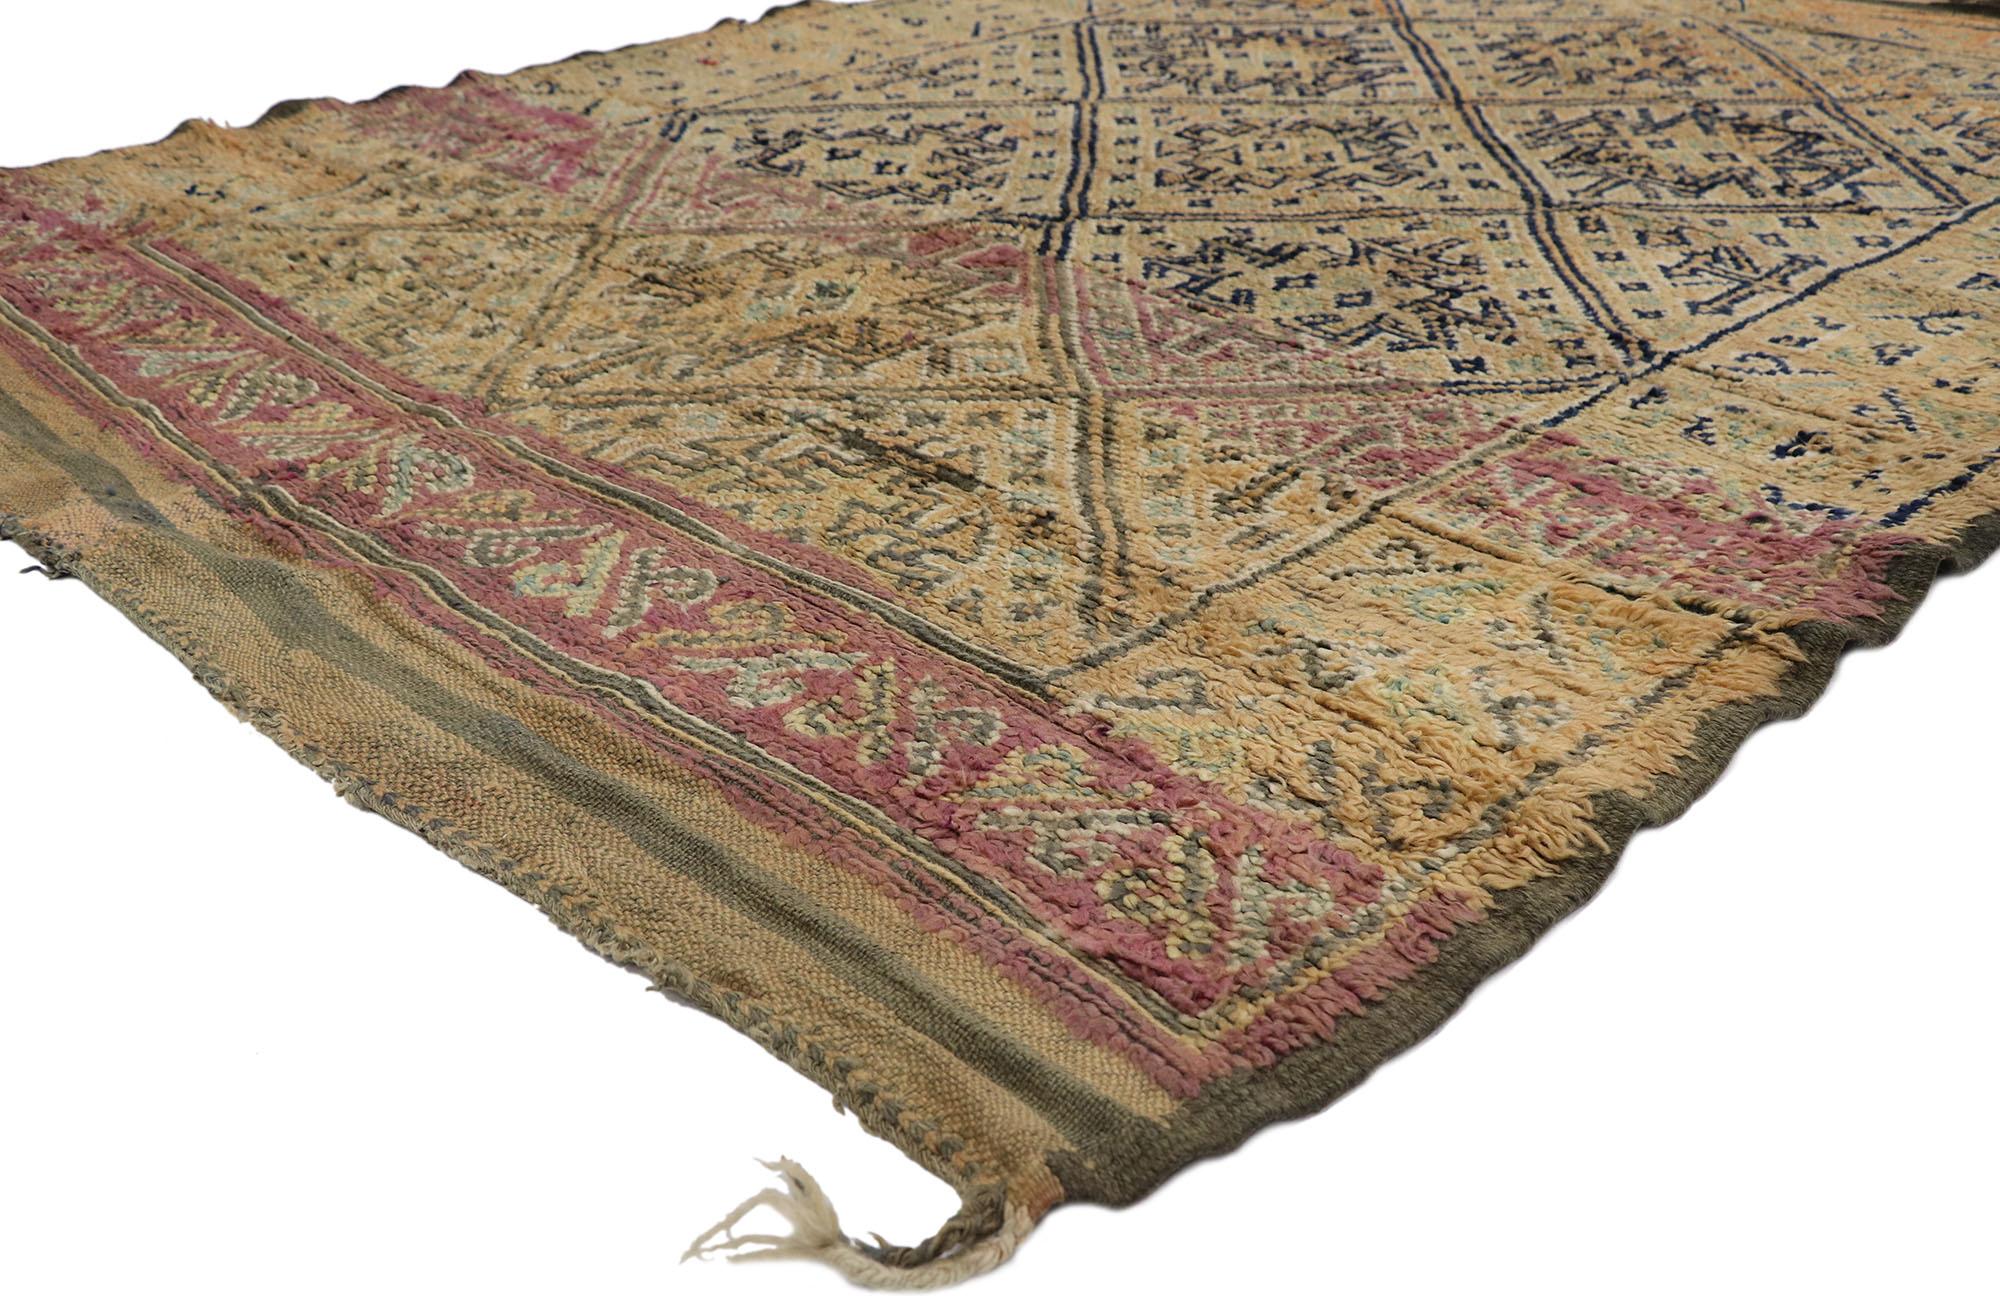 21289 vintage Berber Beni M'Guild Zayane Moroccan rug with Bohemian style 06'00 x 08'00. Showcasing an expressive design in soft colors, incredible detail and texture, this hand knotted wool vintage Berber Beni M'Guild Zayane Moroccan rug is a